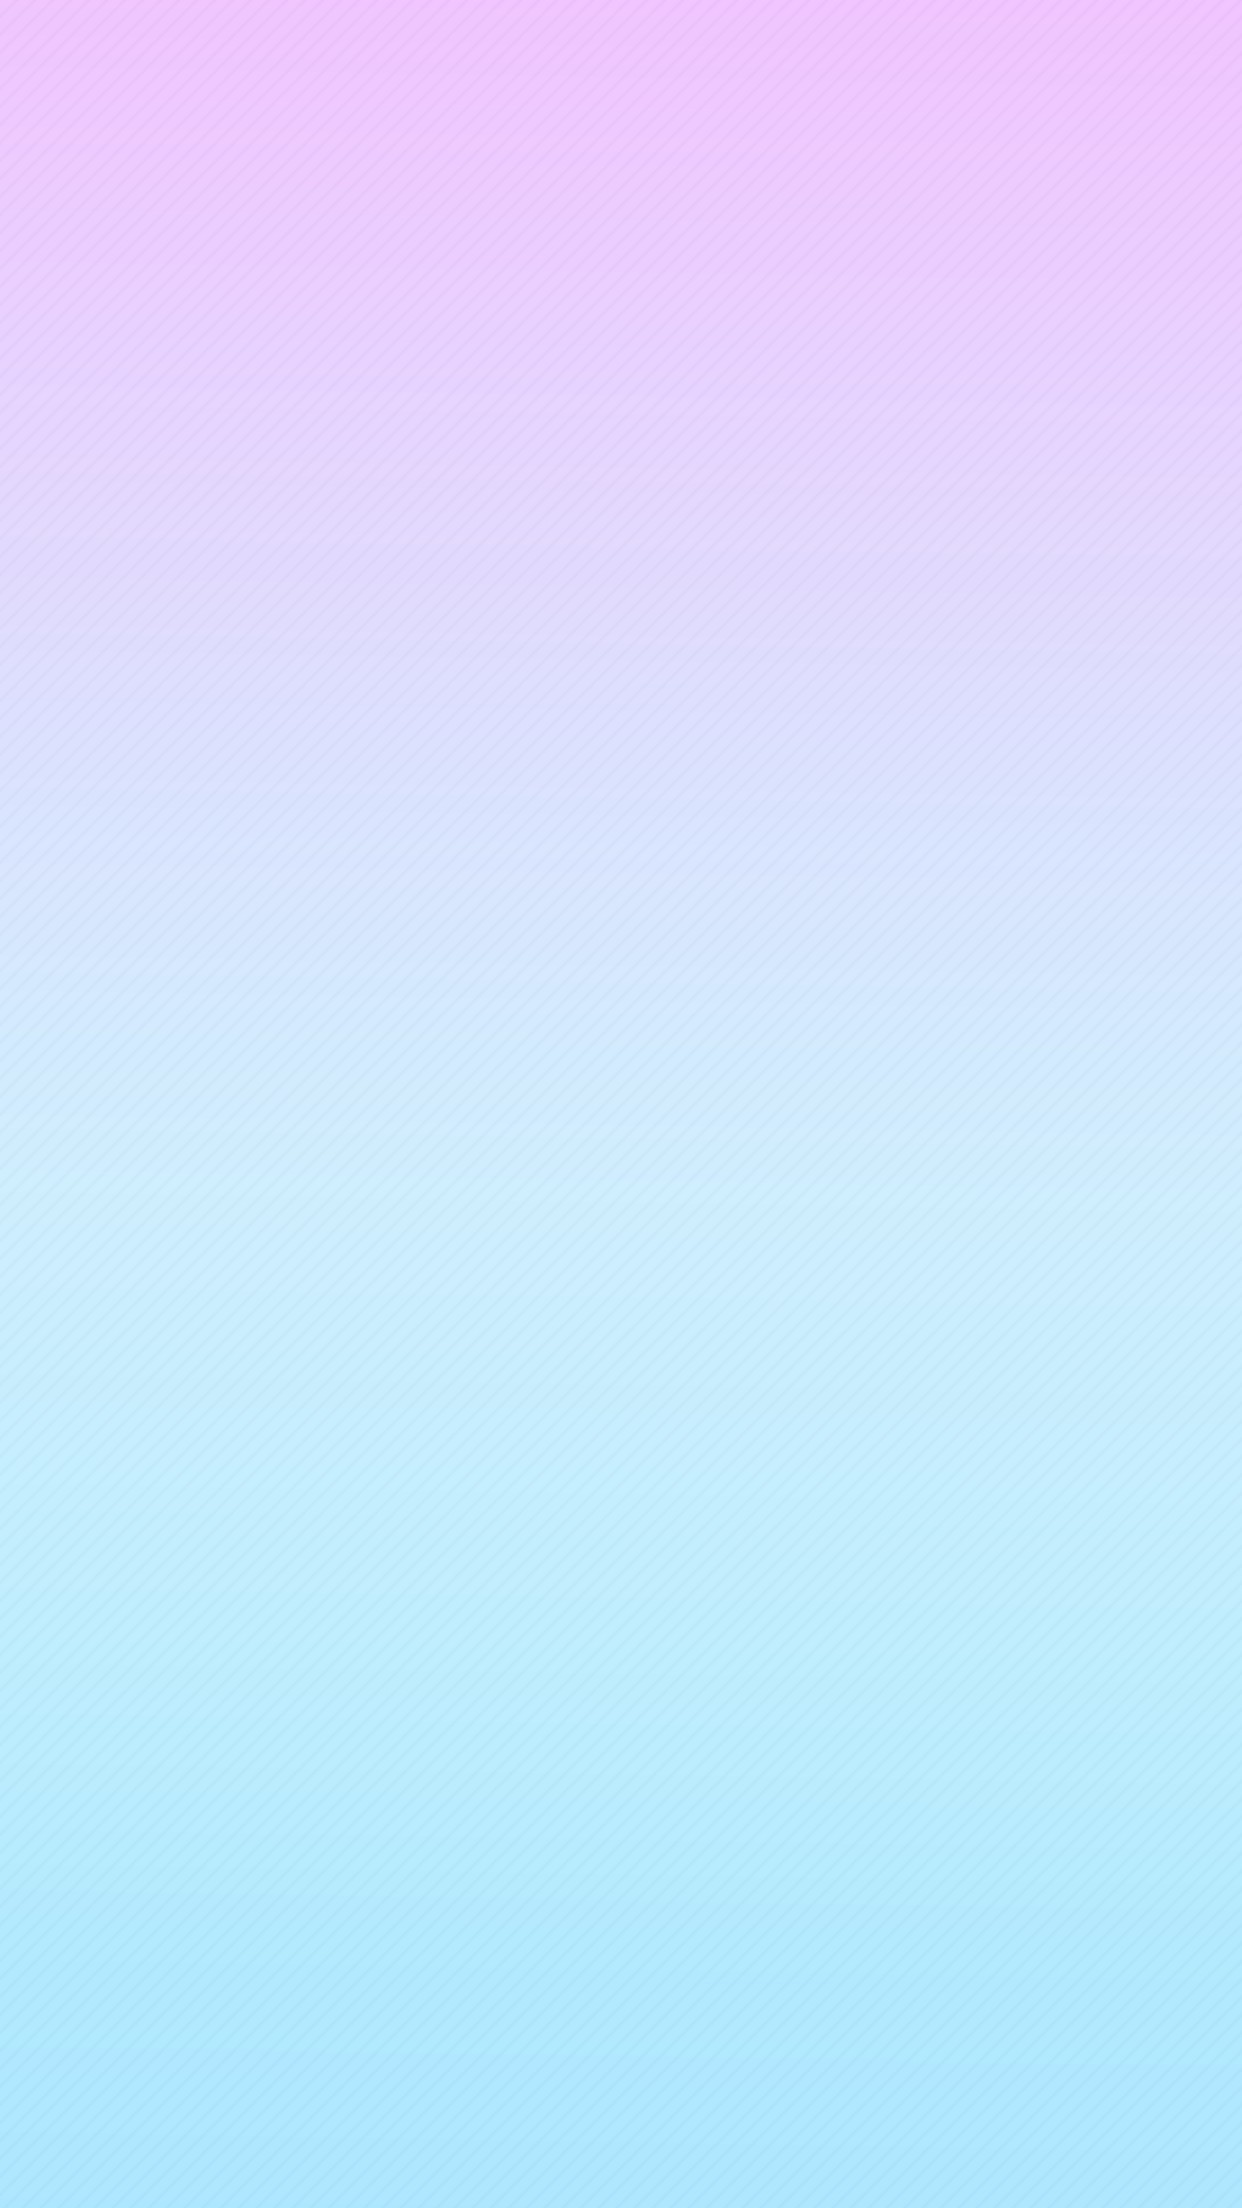 1242x2208, Wallpaper, Background, Iphone, Android, - Blue To Purple Ombre - HD Wallpaper 